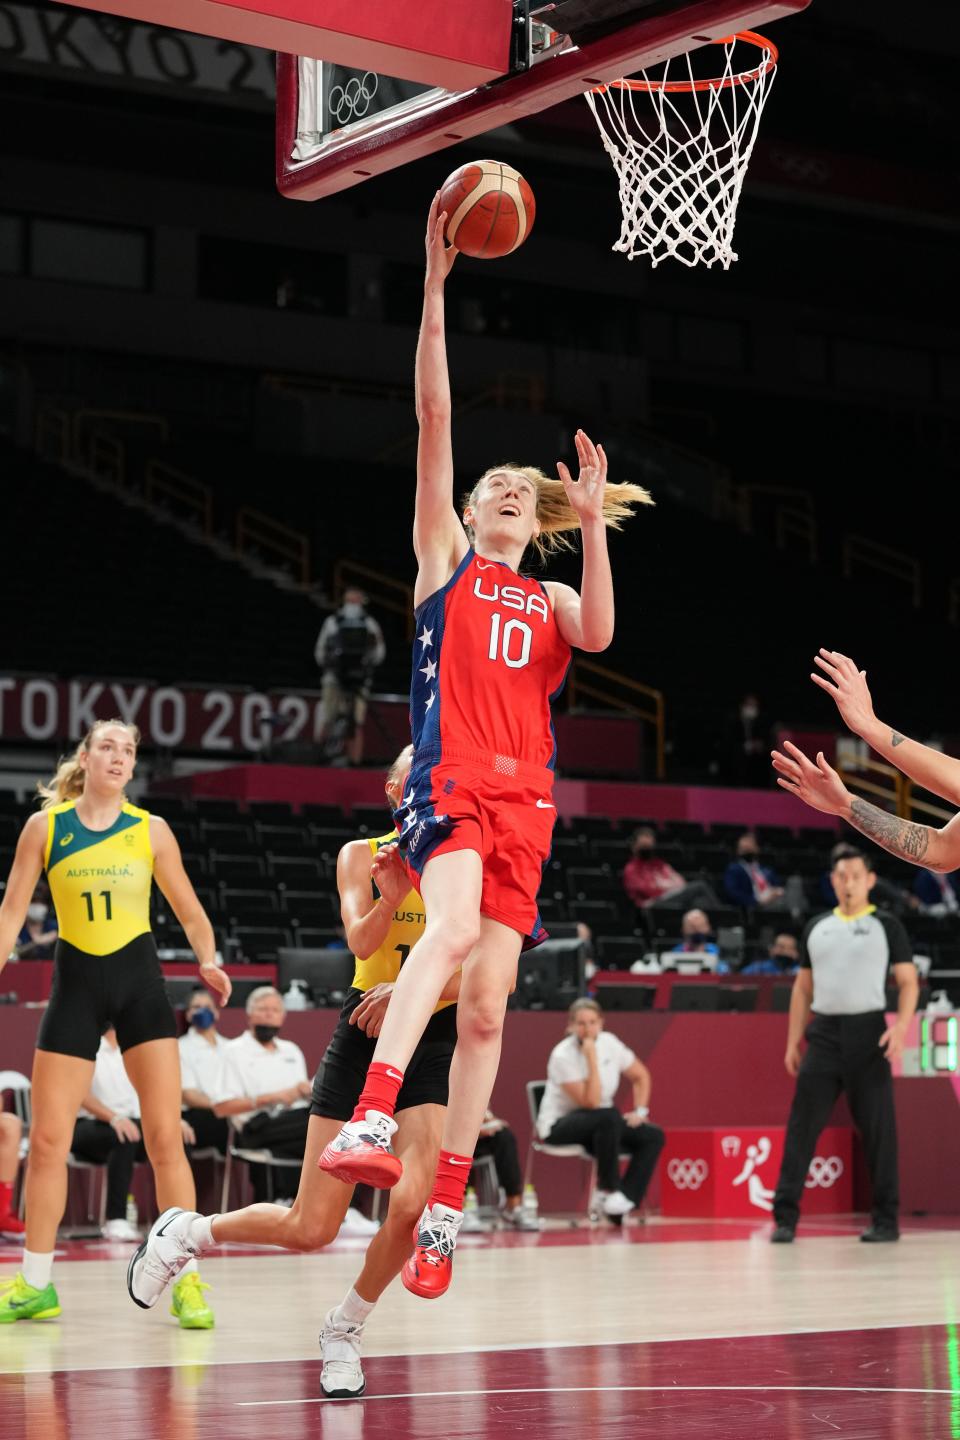 Breanna Stewart scored a game-high 23 points in 23 minutes vs. Australia on Wednesday.